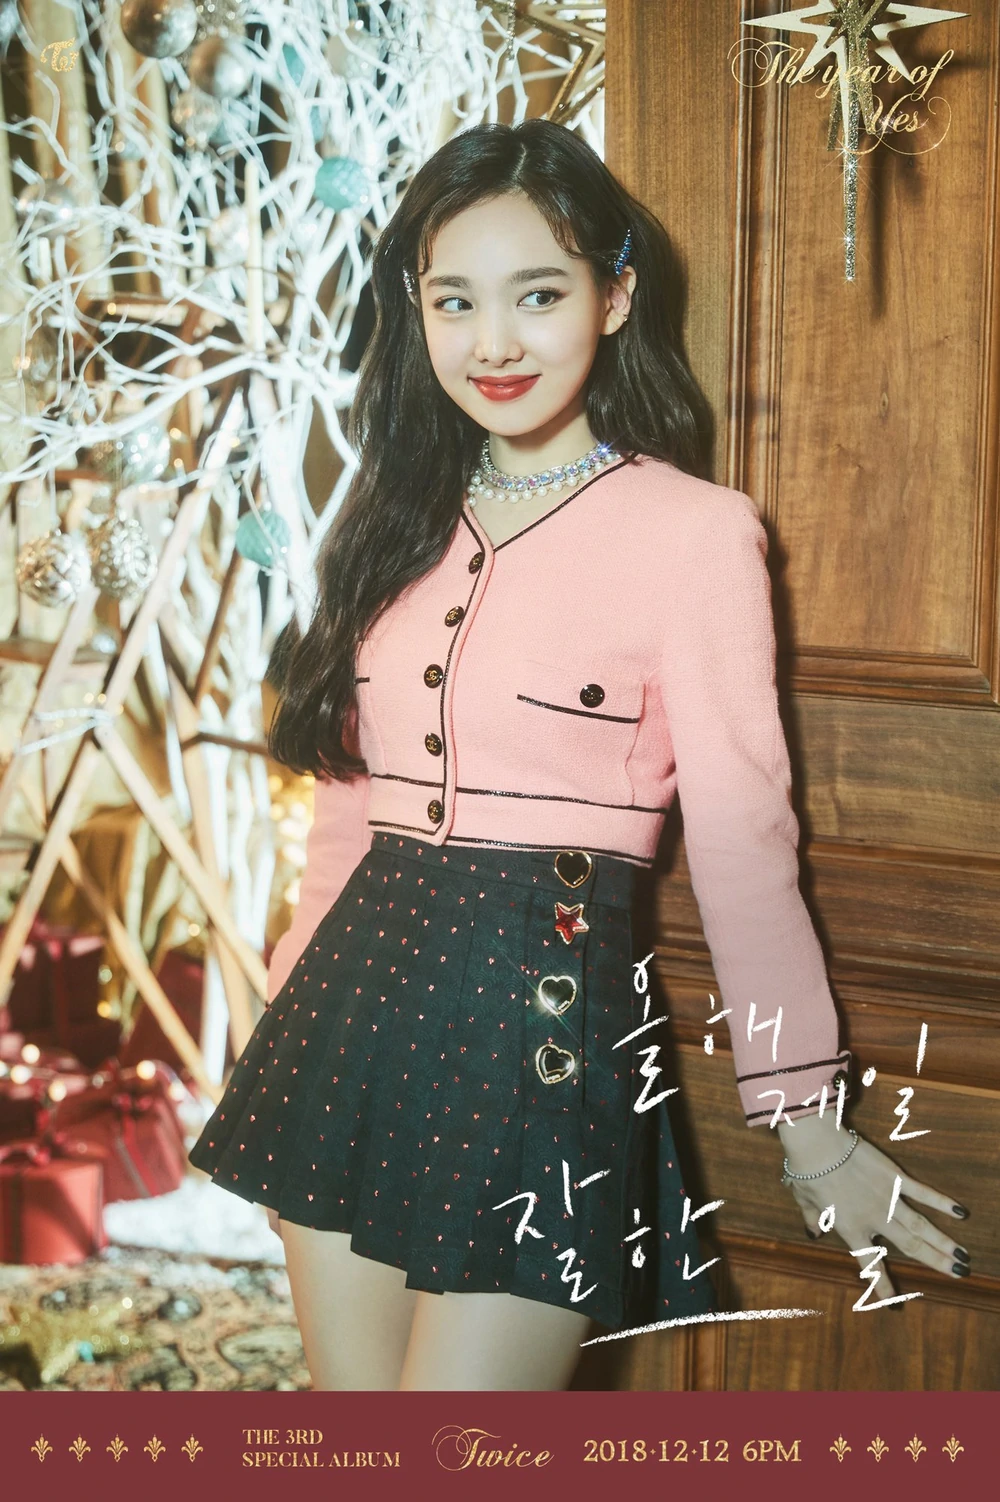 Twice Year Of Yes Nayeon Concept Teaser Picture Image Photo Kpop K-Concept 2